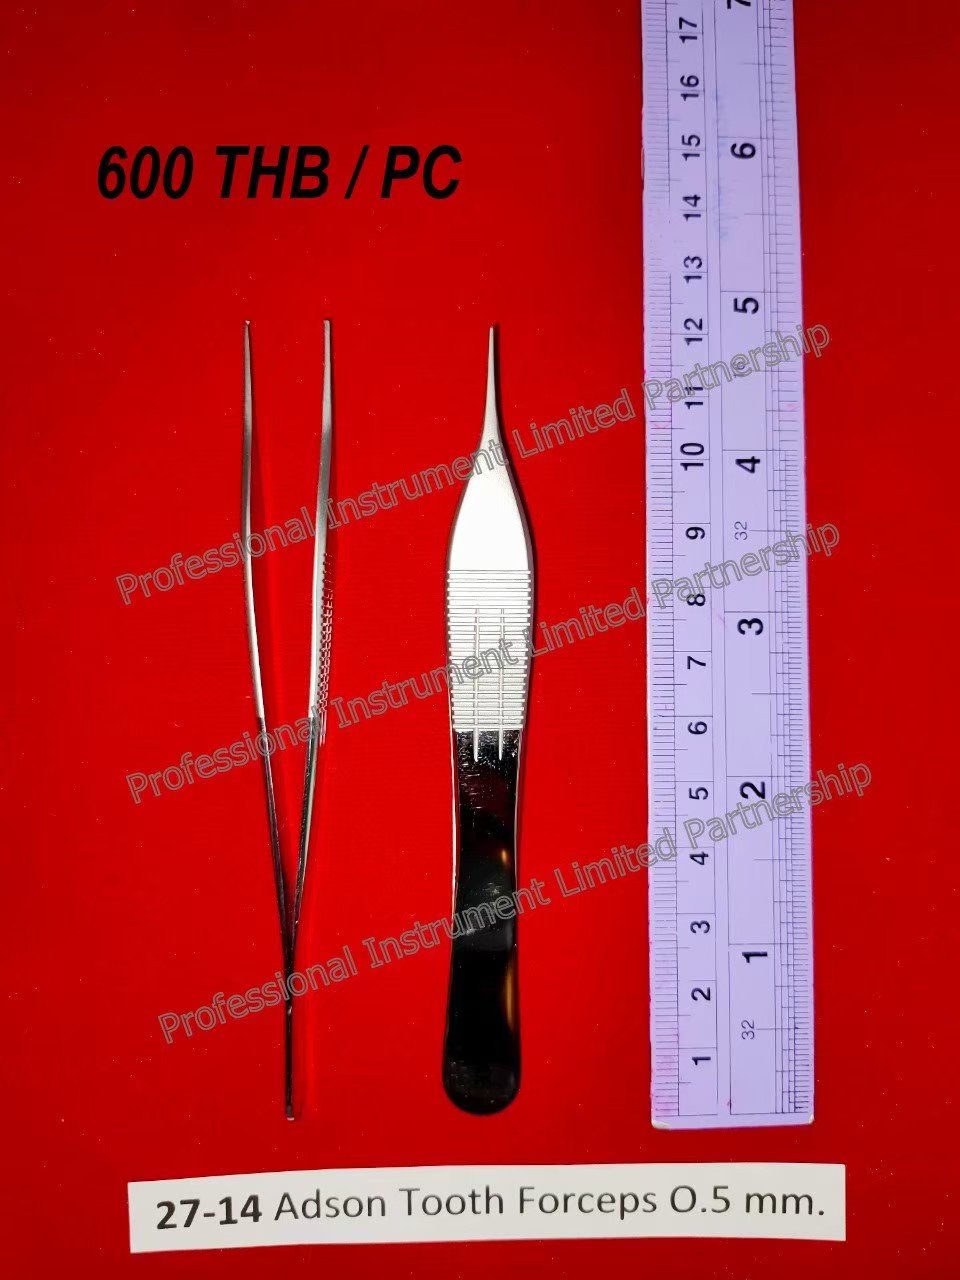 Adson Tooth Forceps 0.5mm